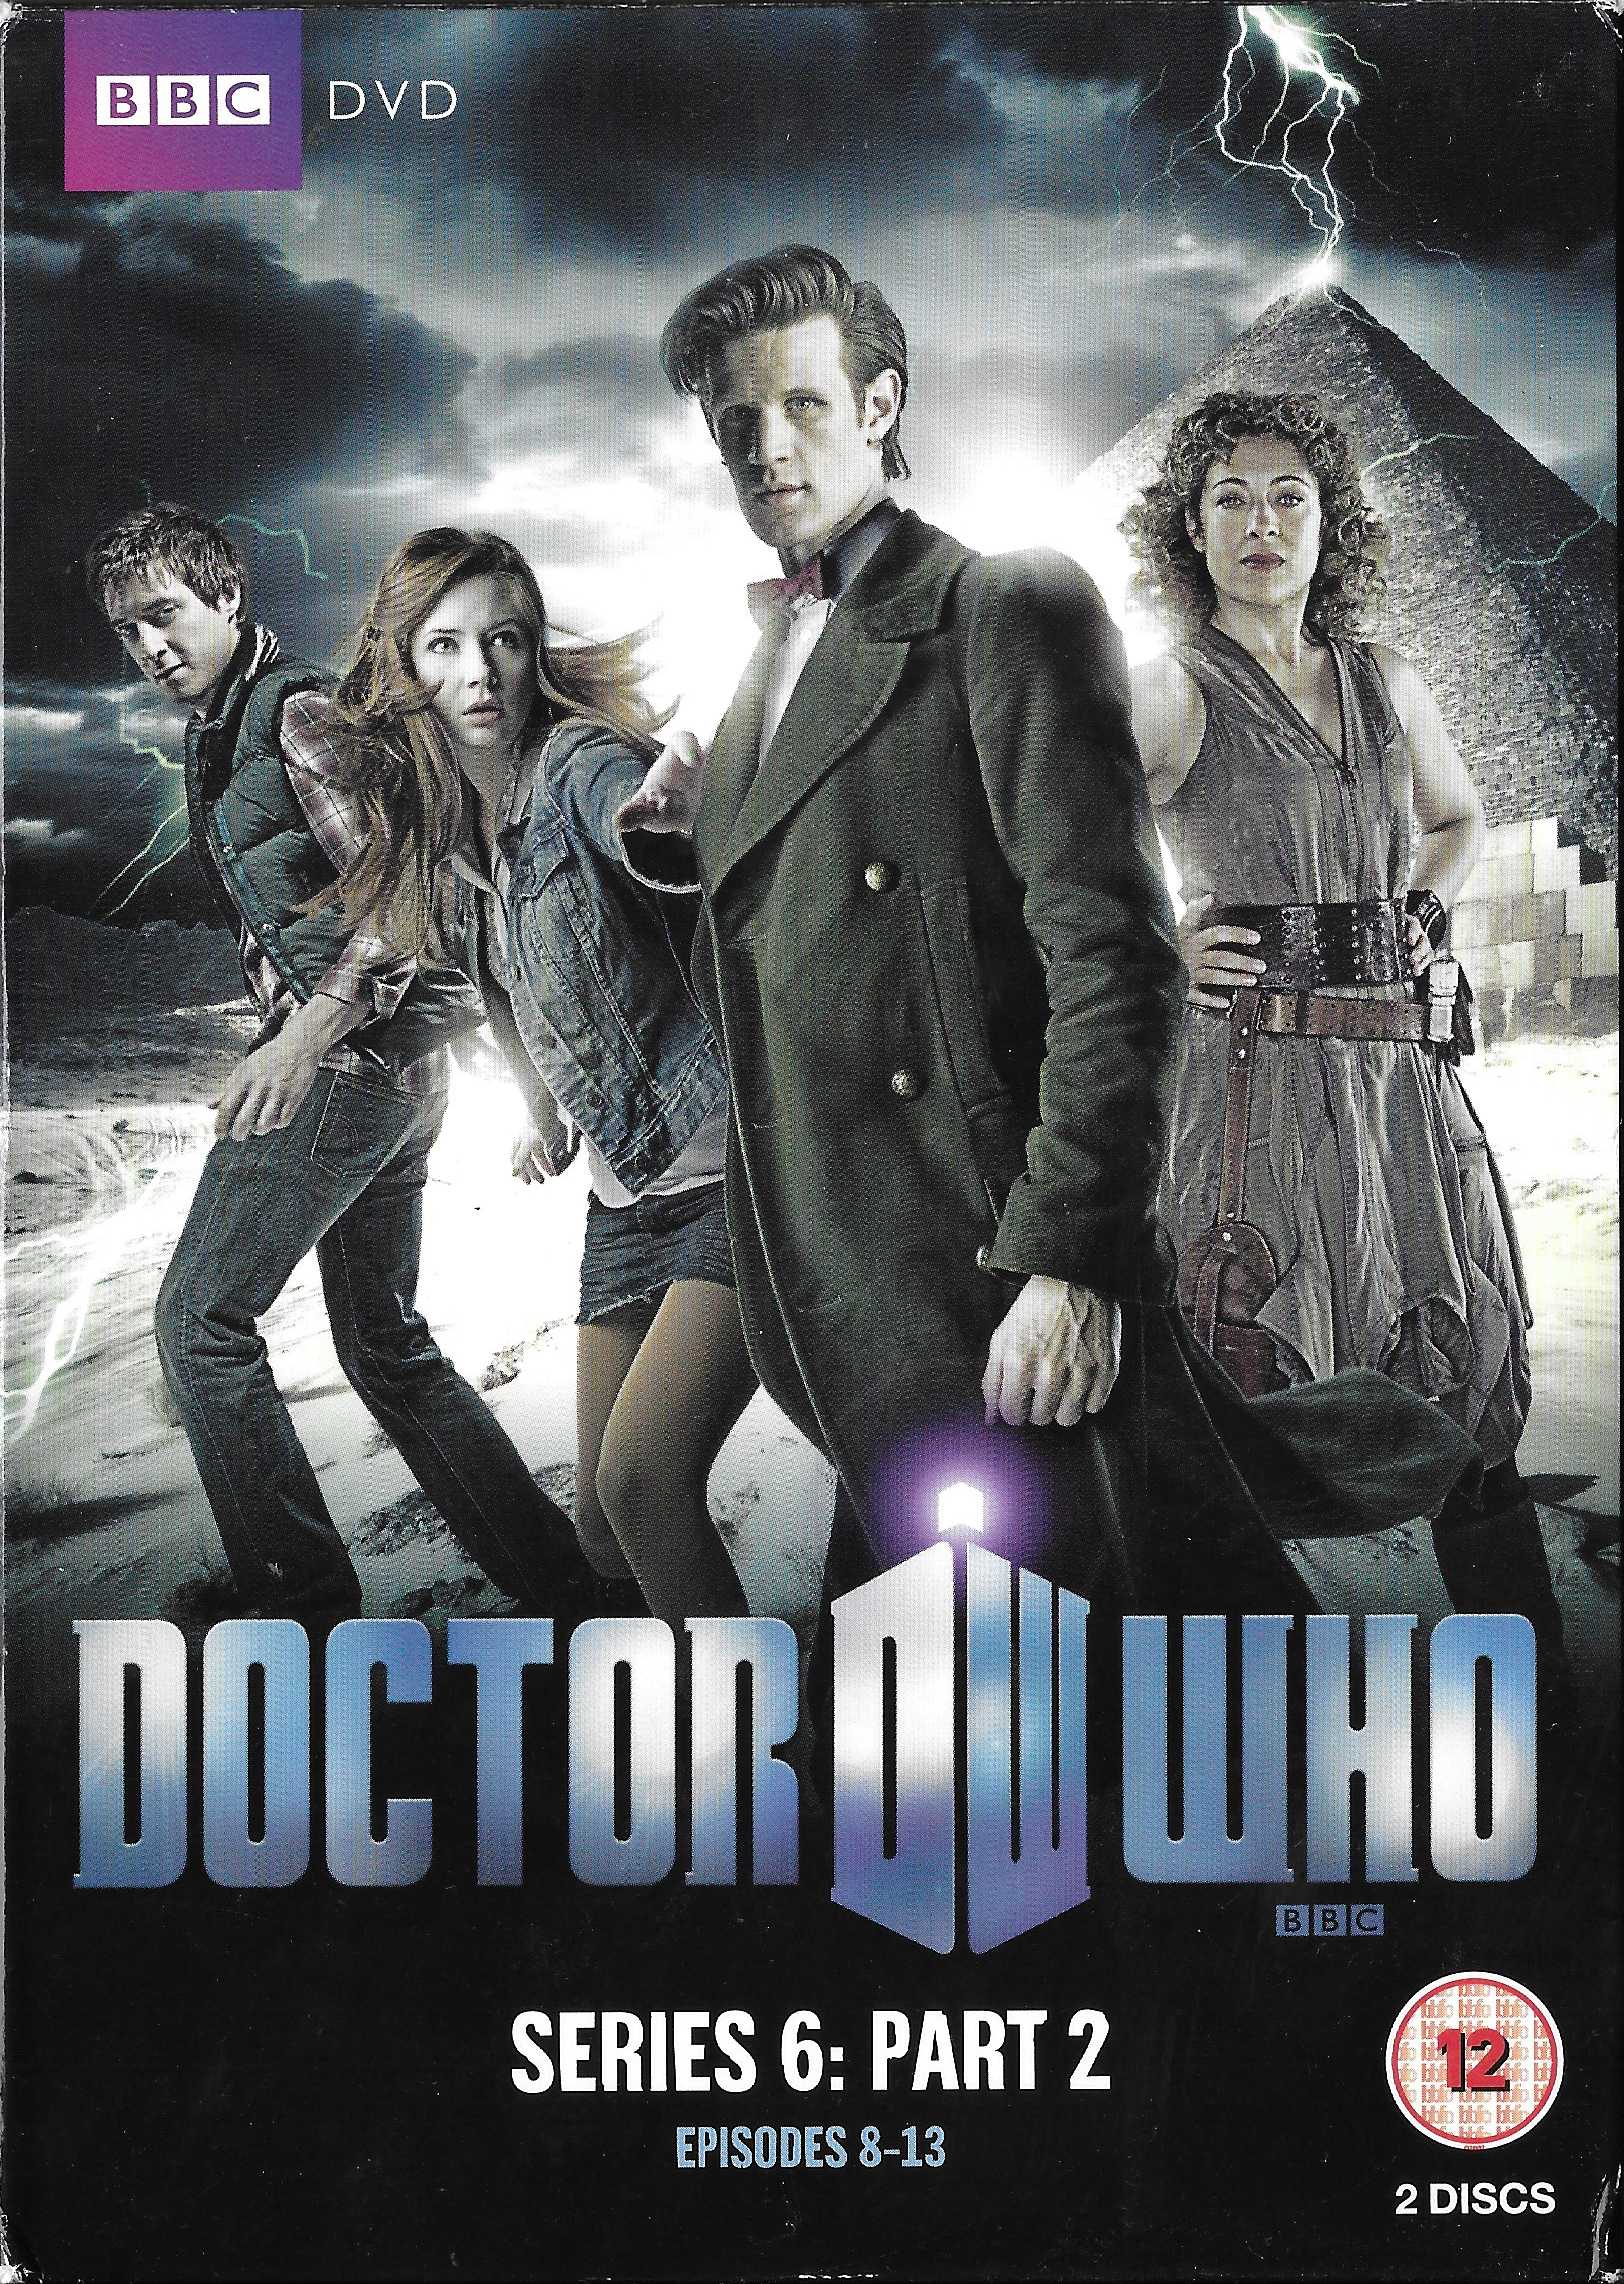 Picture of BBCDVD 3429 Doctor Who - Series 6, volume 2 by artist Steven Moffat / Mark Gatiss / Tom Macrae from the BBC dvds - Records and Tapes library